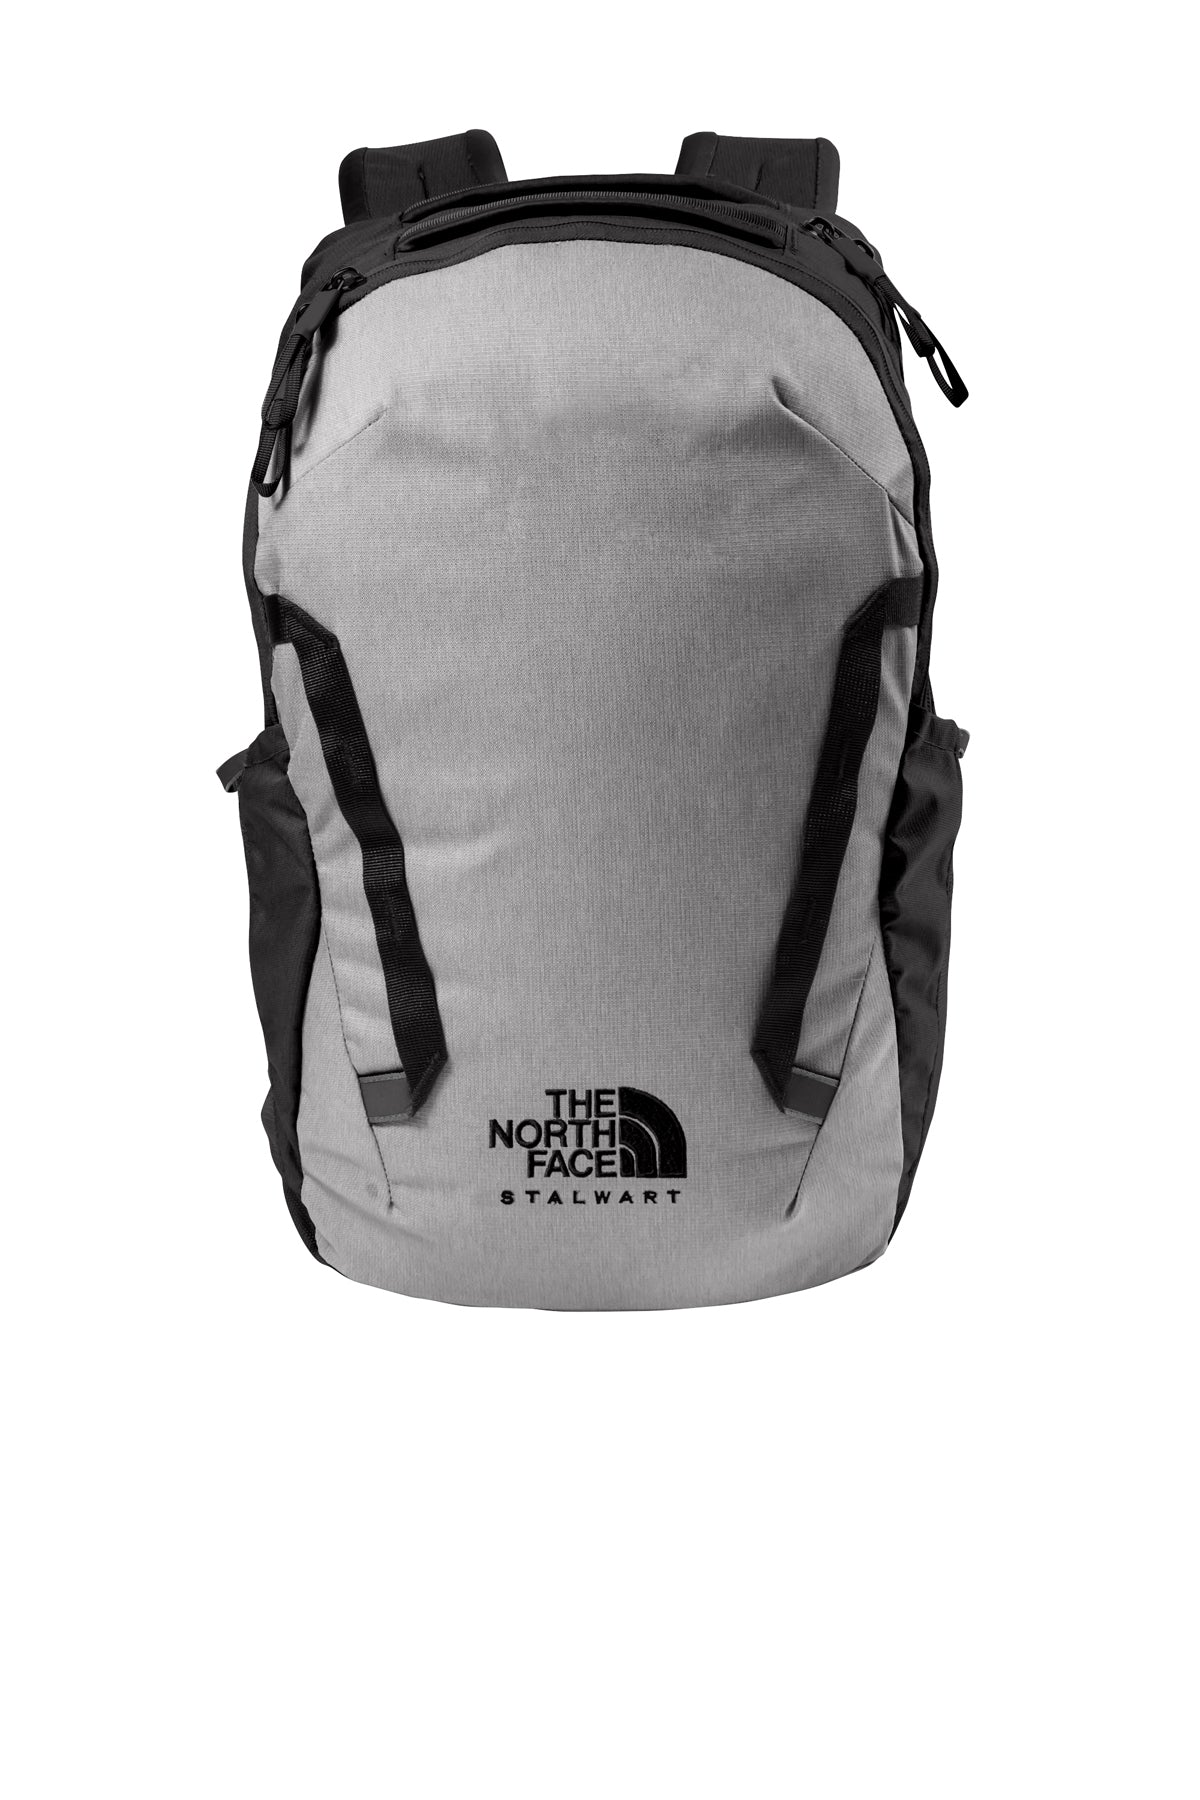 The North Face Stalwart Backpack-4